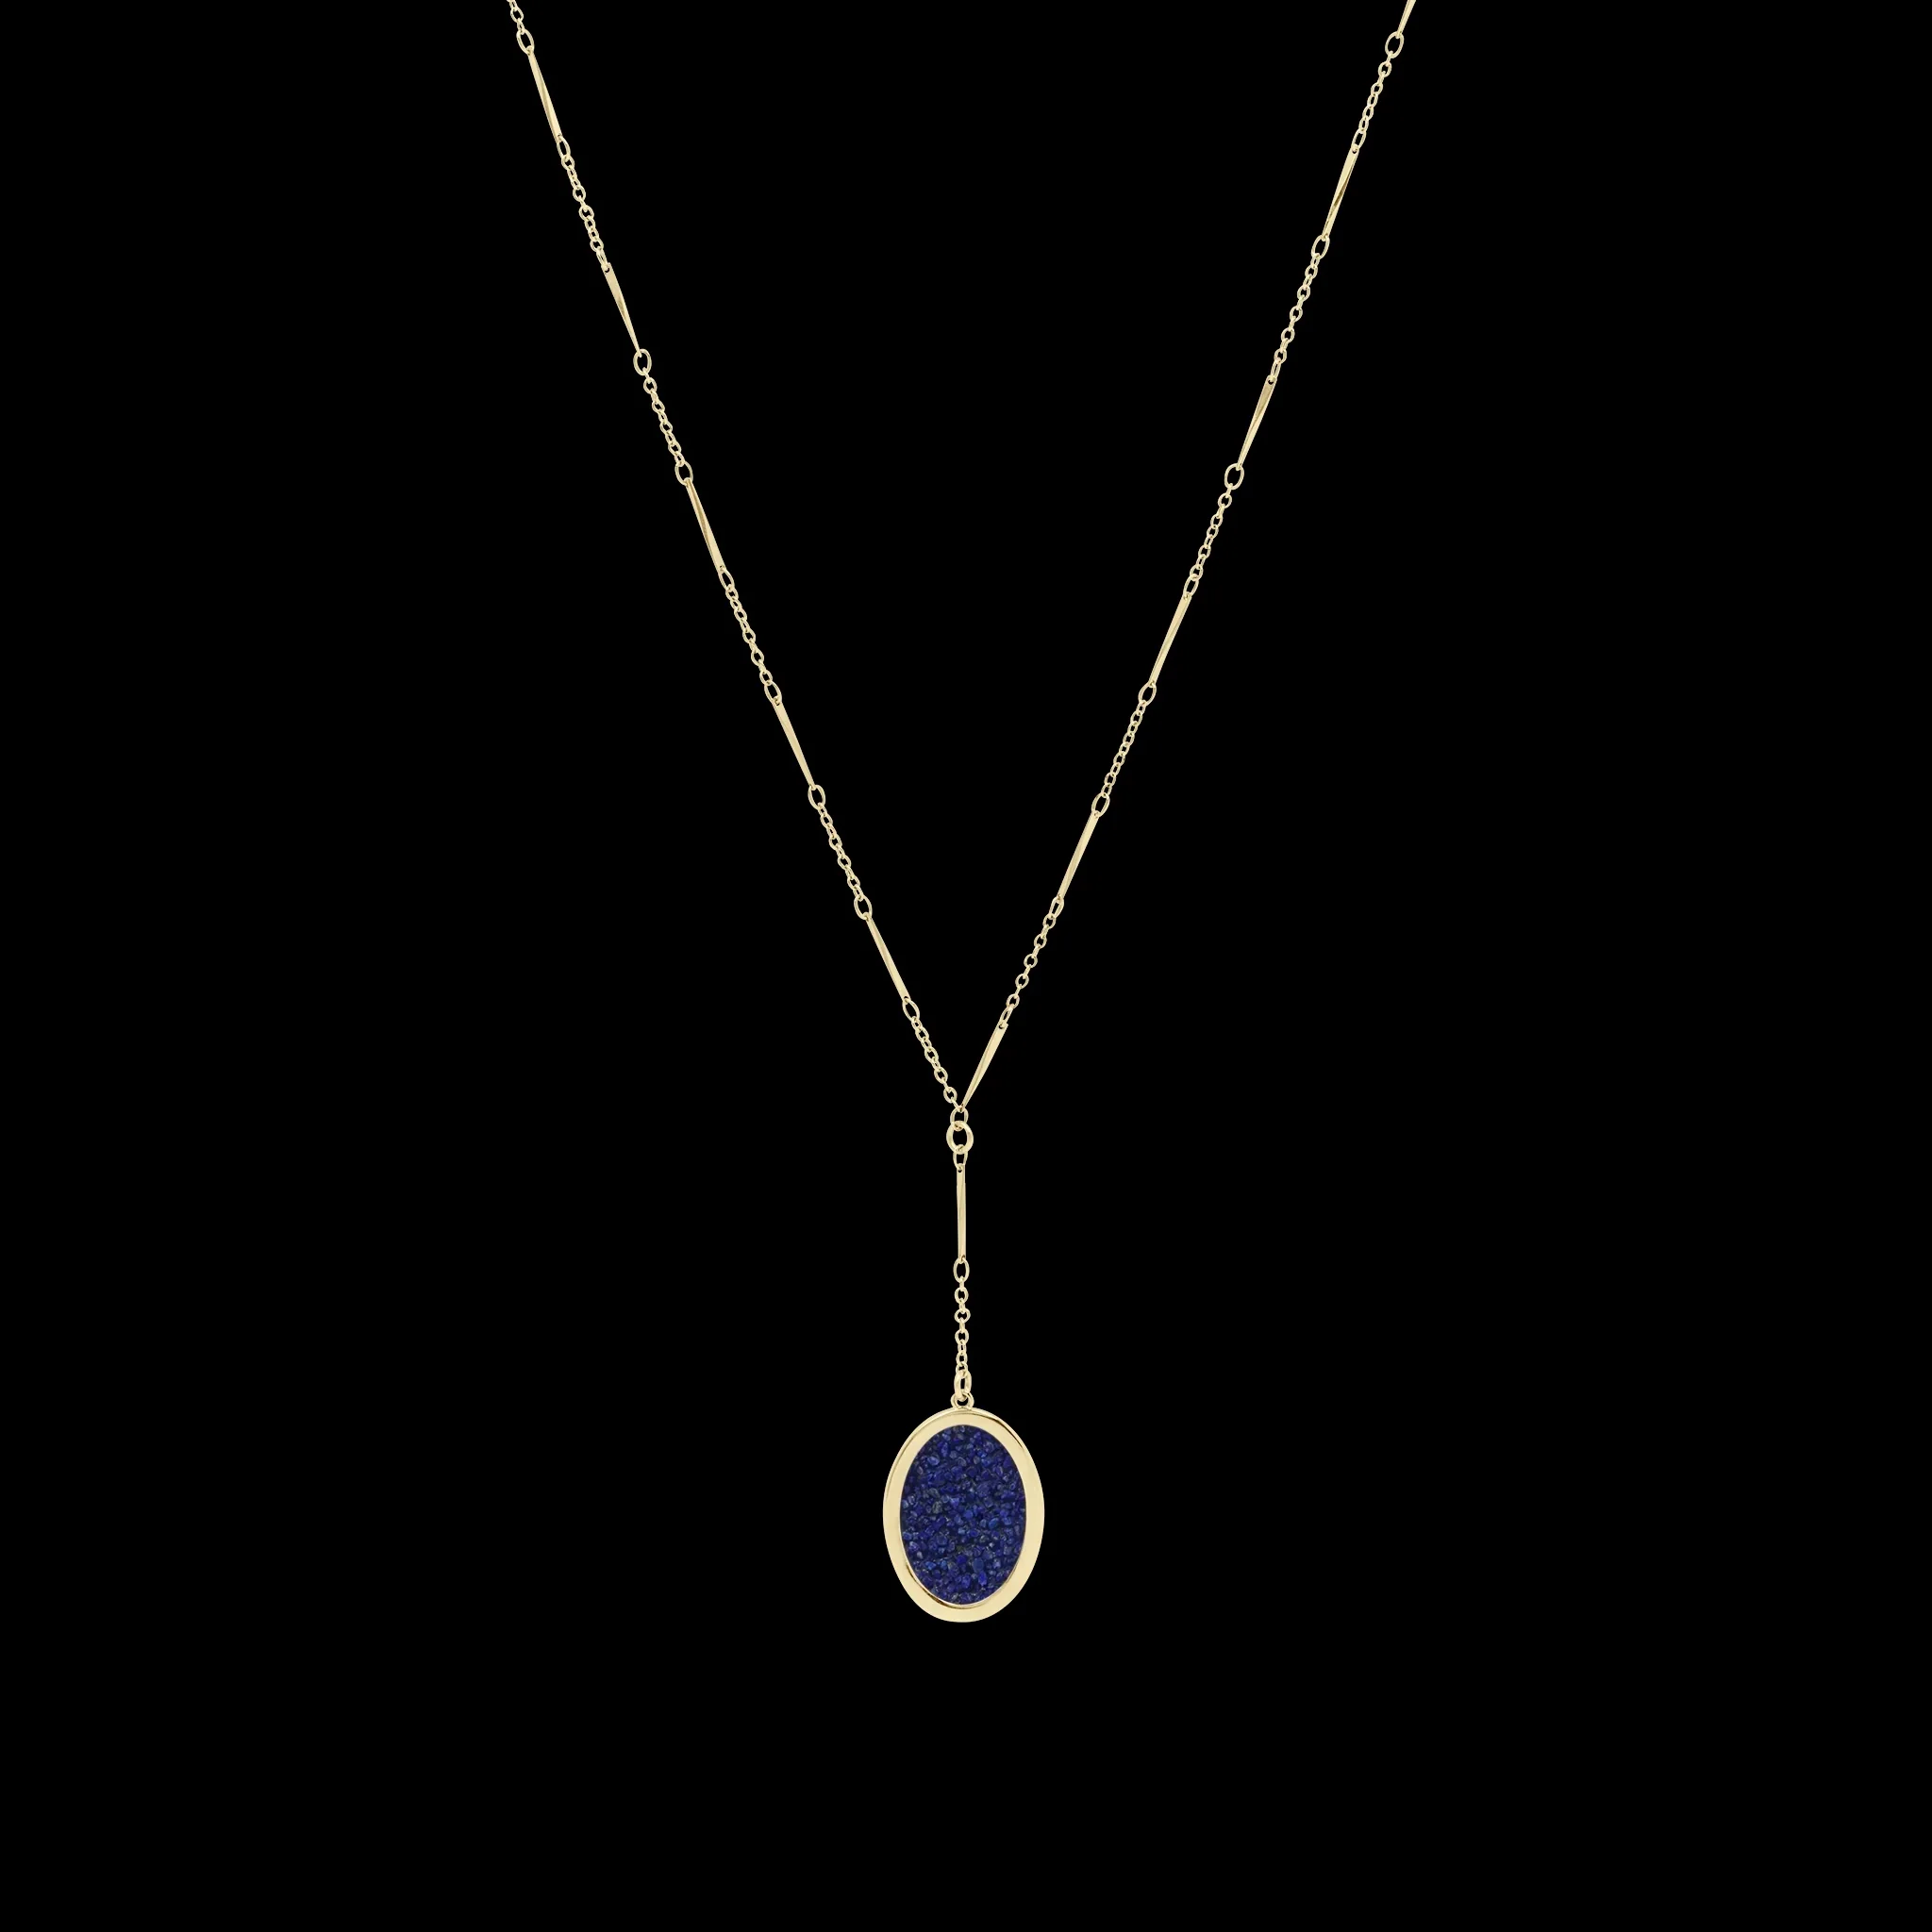 a gold chain with a blue stone pendant